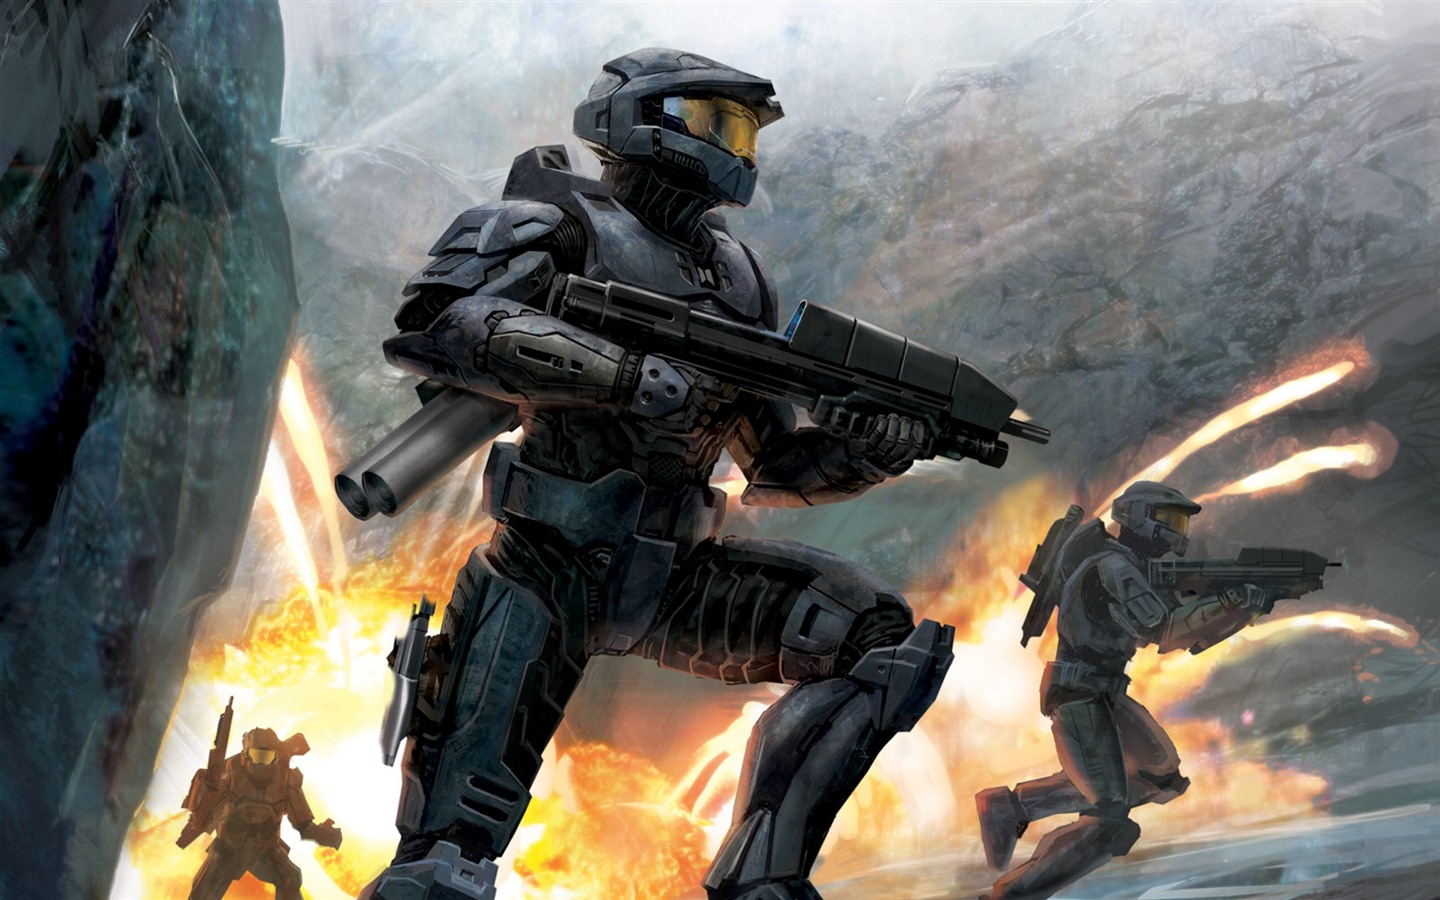 Halo game HD wallpapers #4 - 1440x900